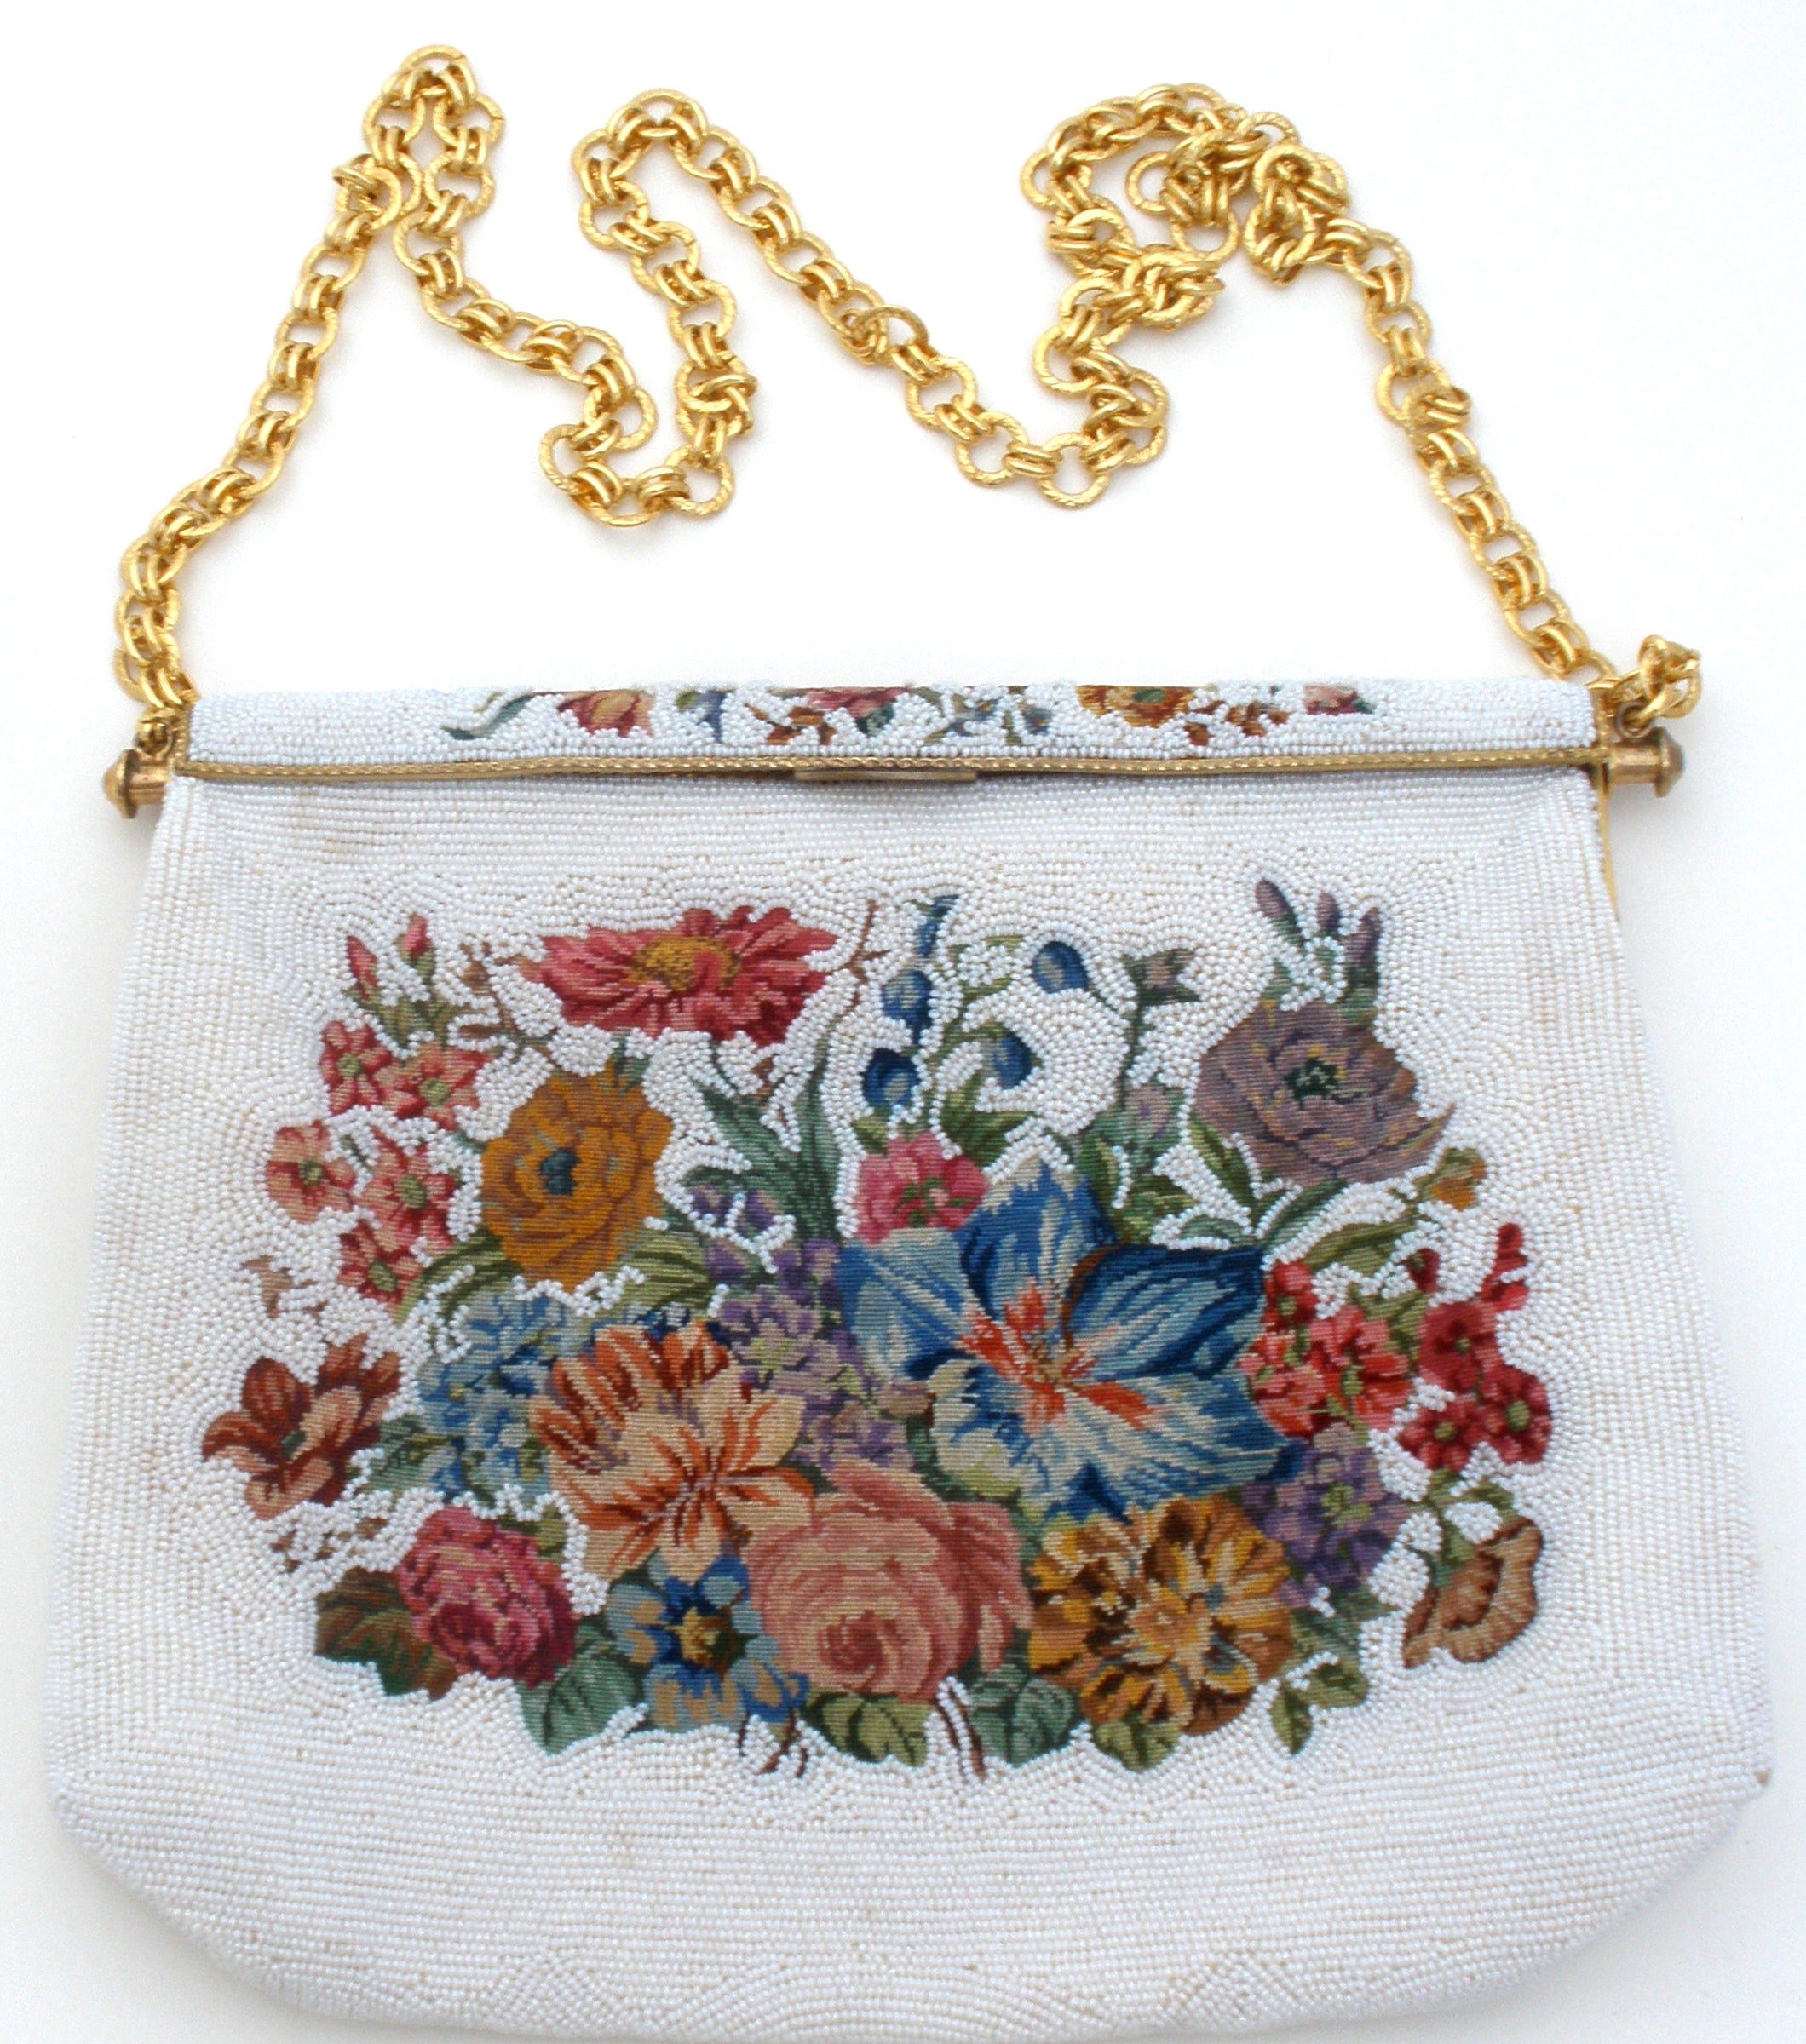 Buy Small Floral Purse 90s Y2k Vintage Fossil Linen Bag Online in India -  Etsy